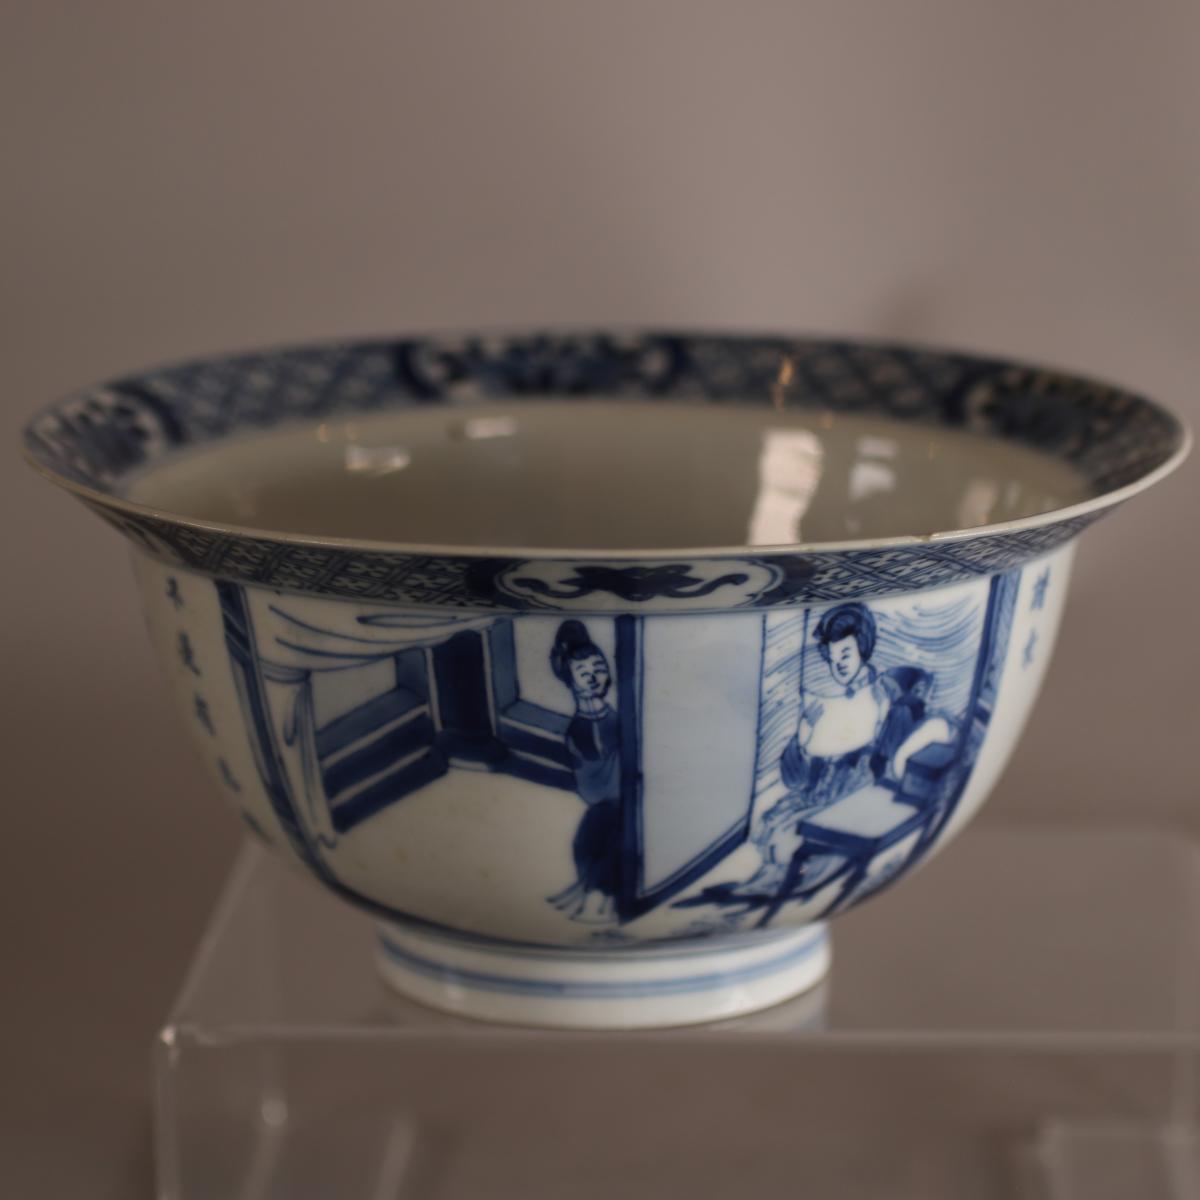 Interior scene on side of blue and white Kangxi bowl